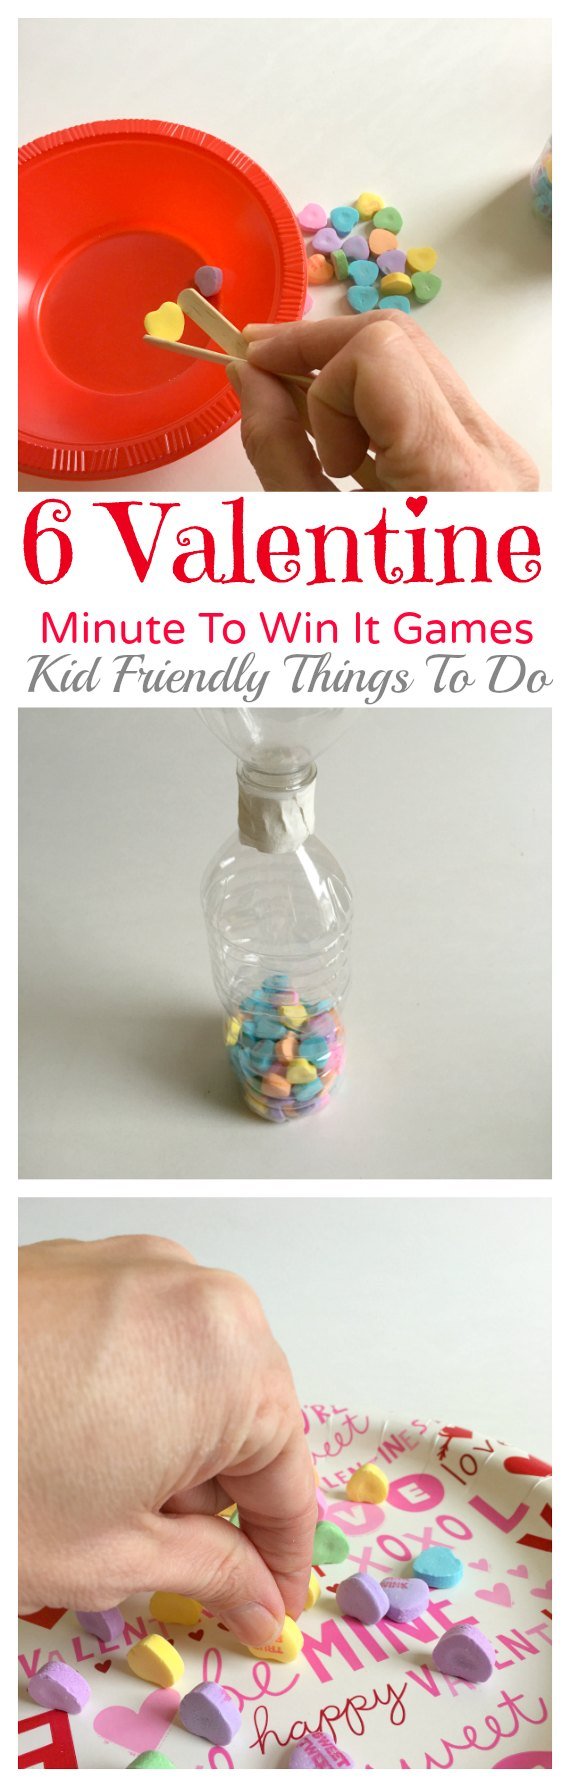 Our Minute To Win It Valentine's Day Party Games! - KidFriendlyThingsToDo.com